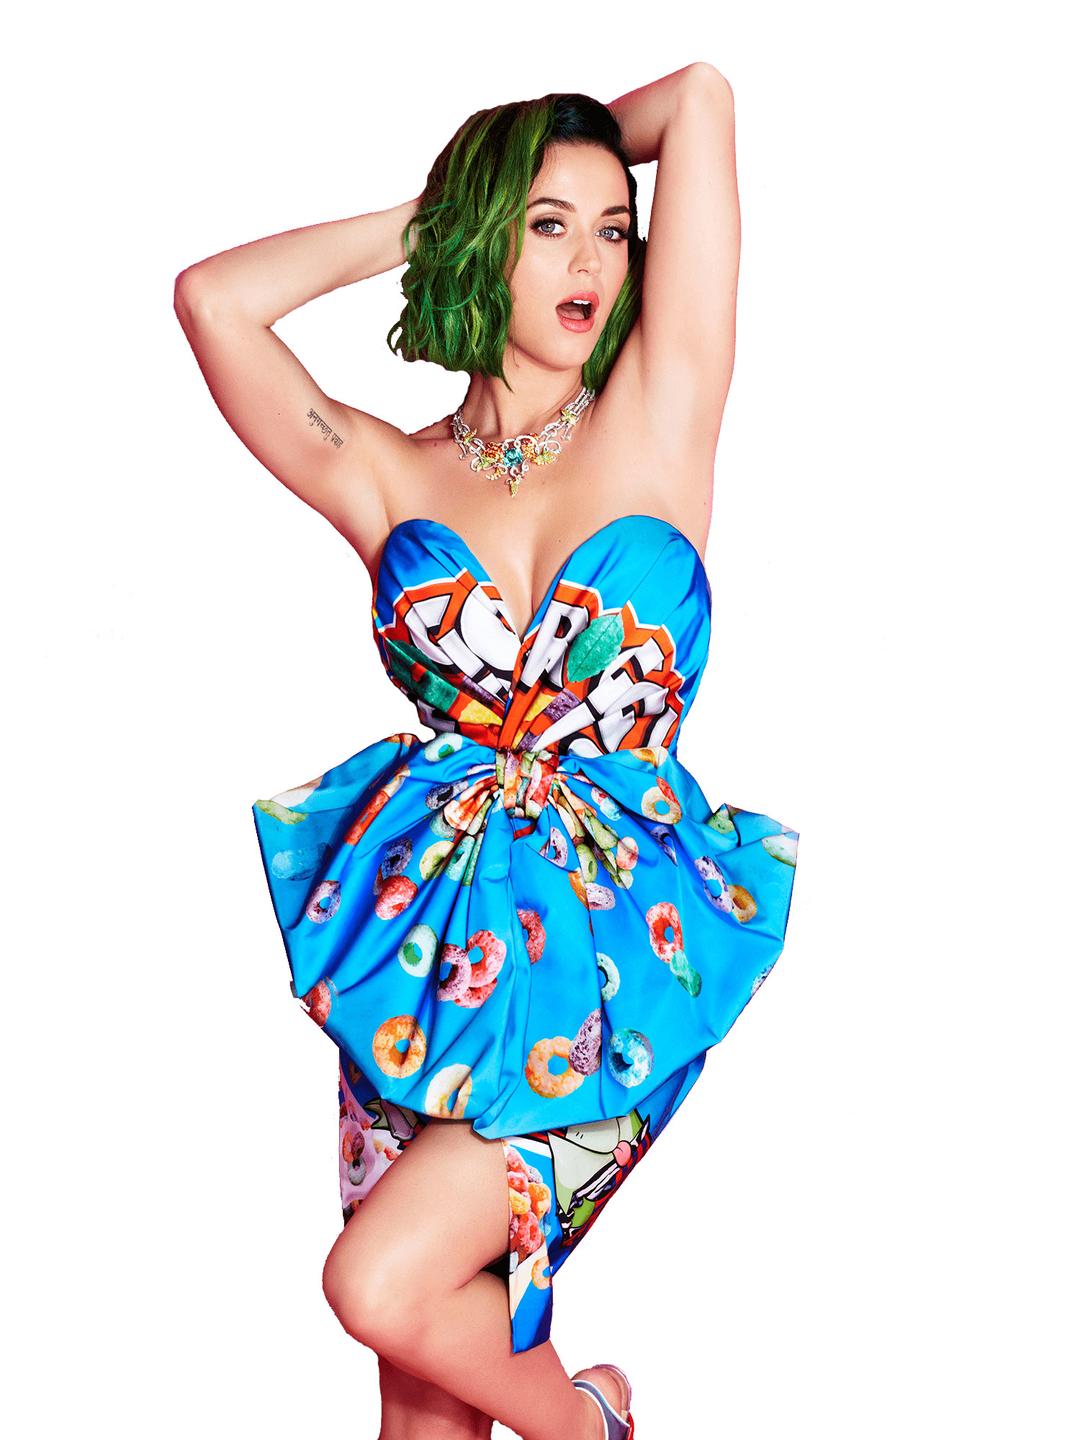 Blue Dress Katy Perry png transparent